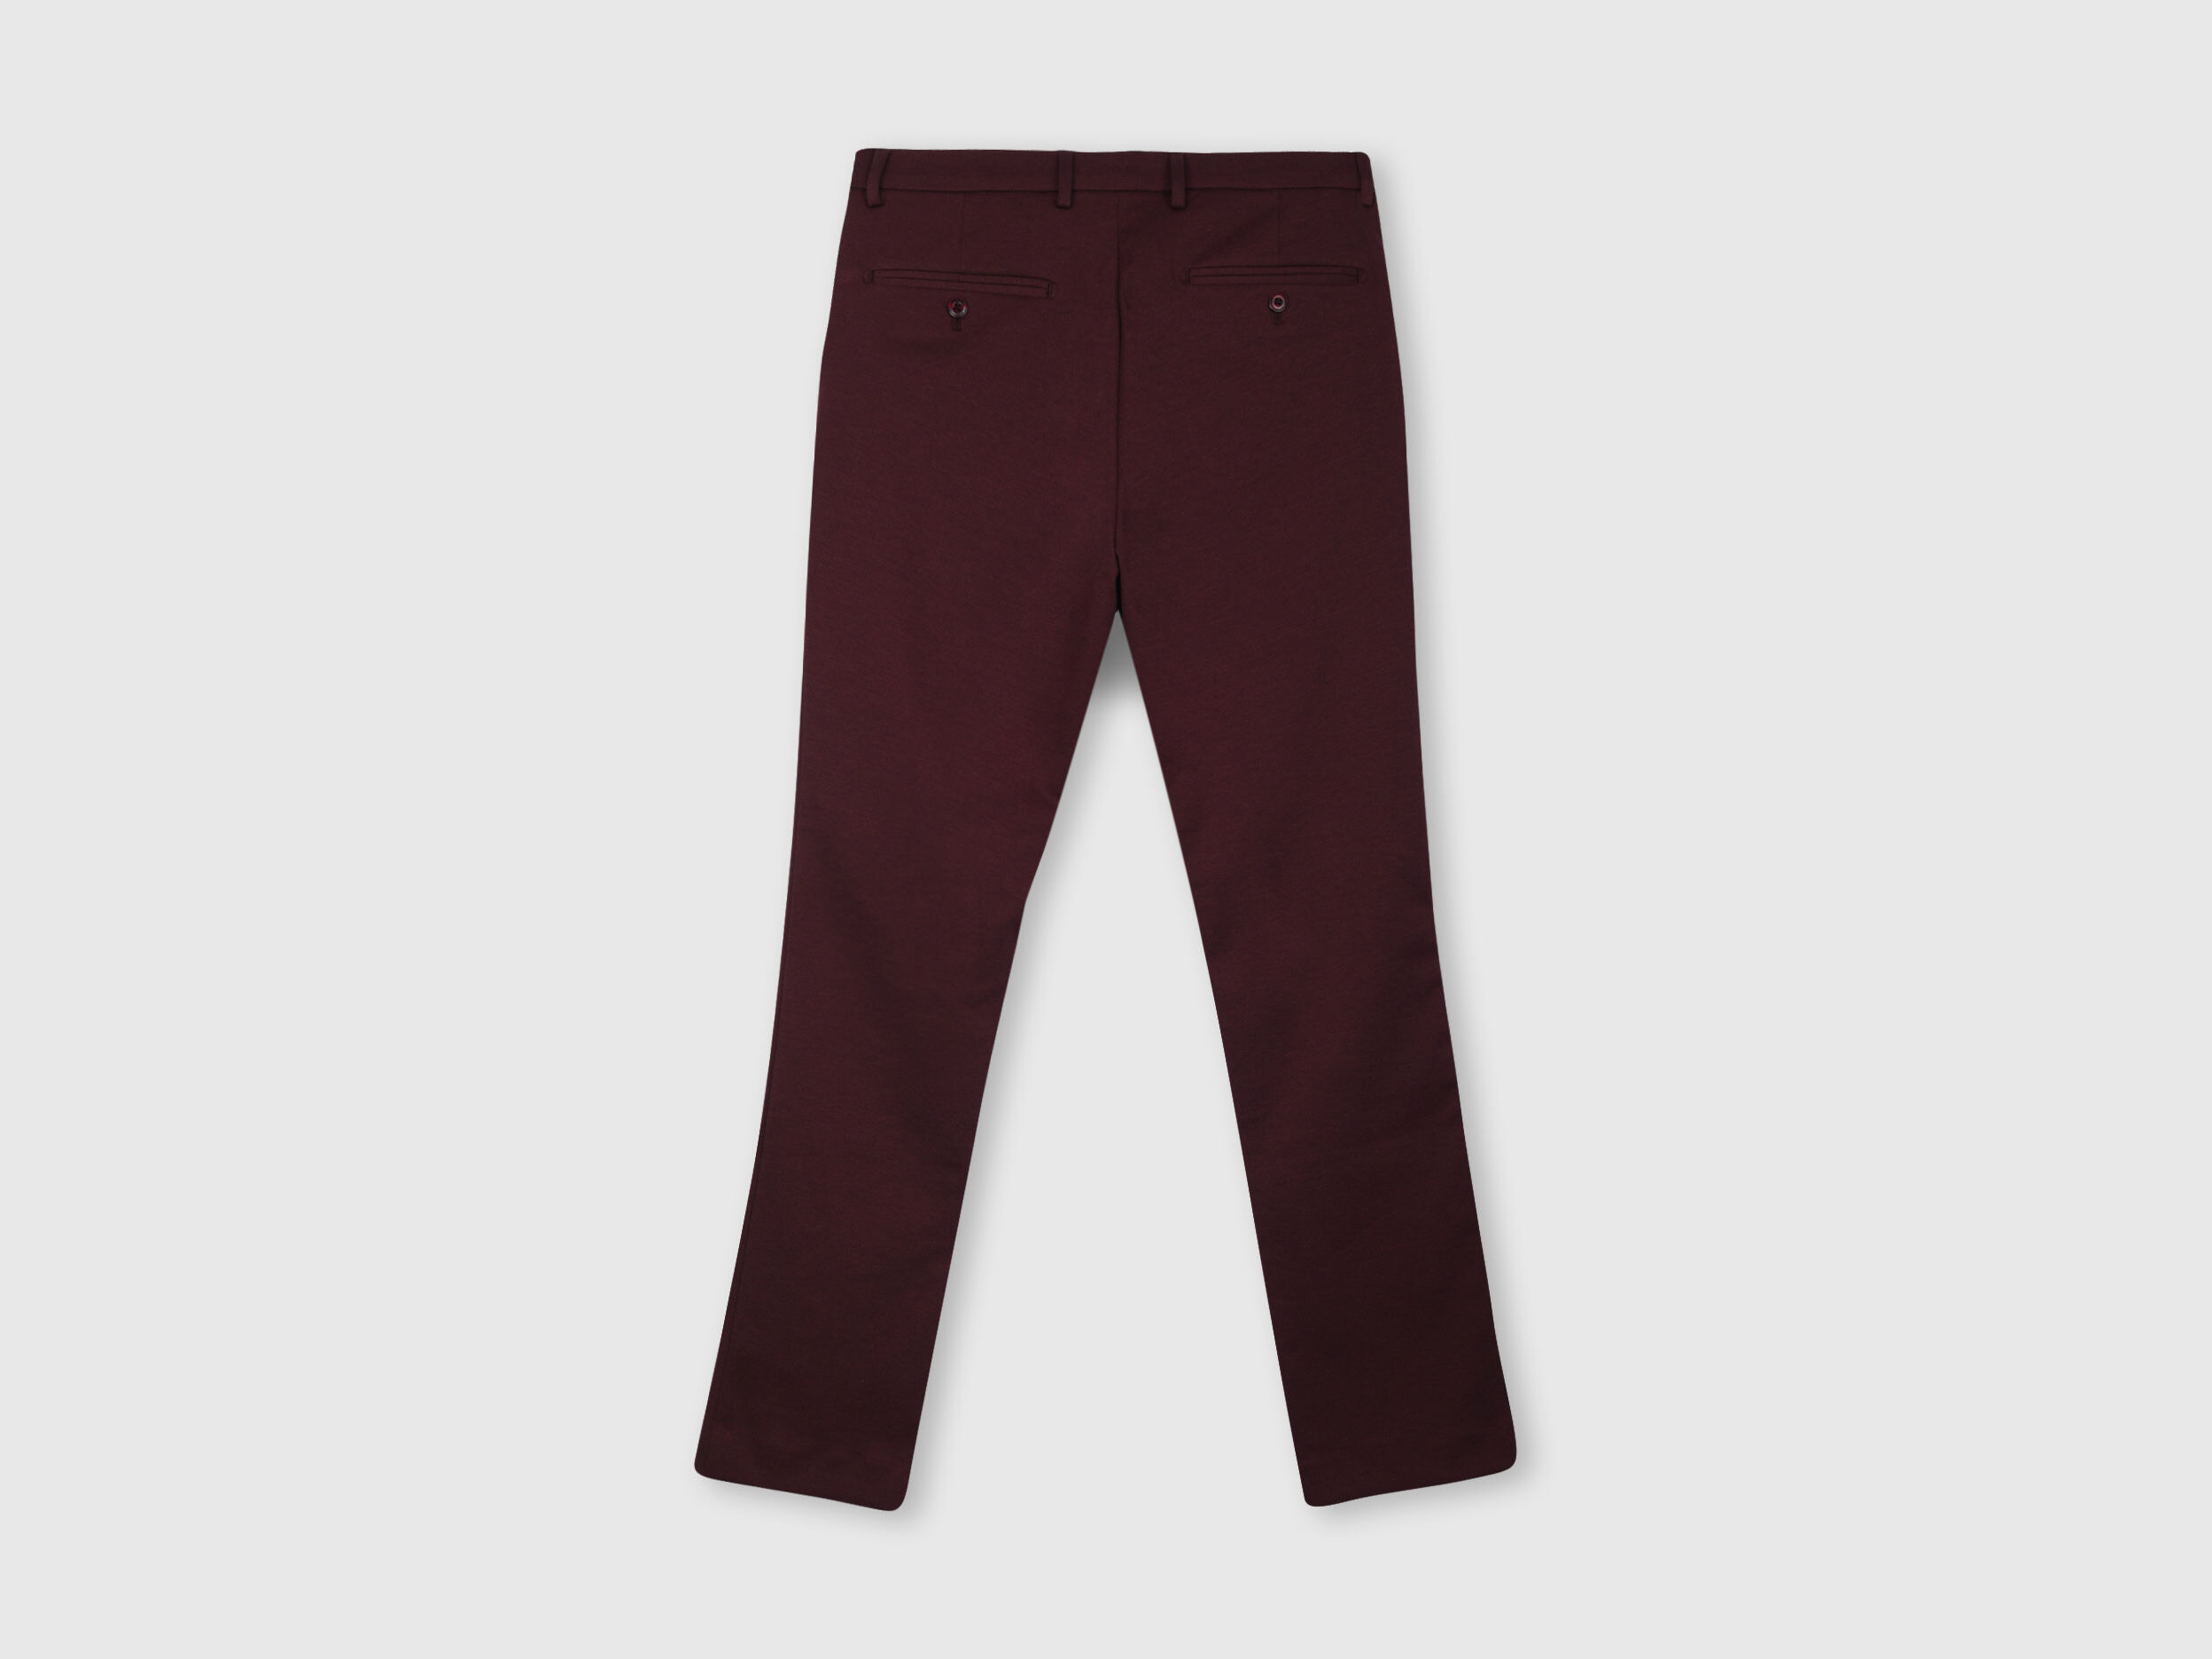 Buy UCB Solid Polyester Slim Fit Men's Casual Trousers | Shoppers Stop